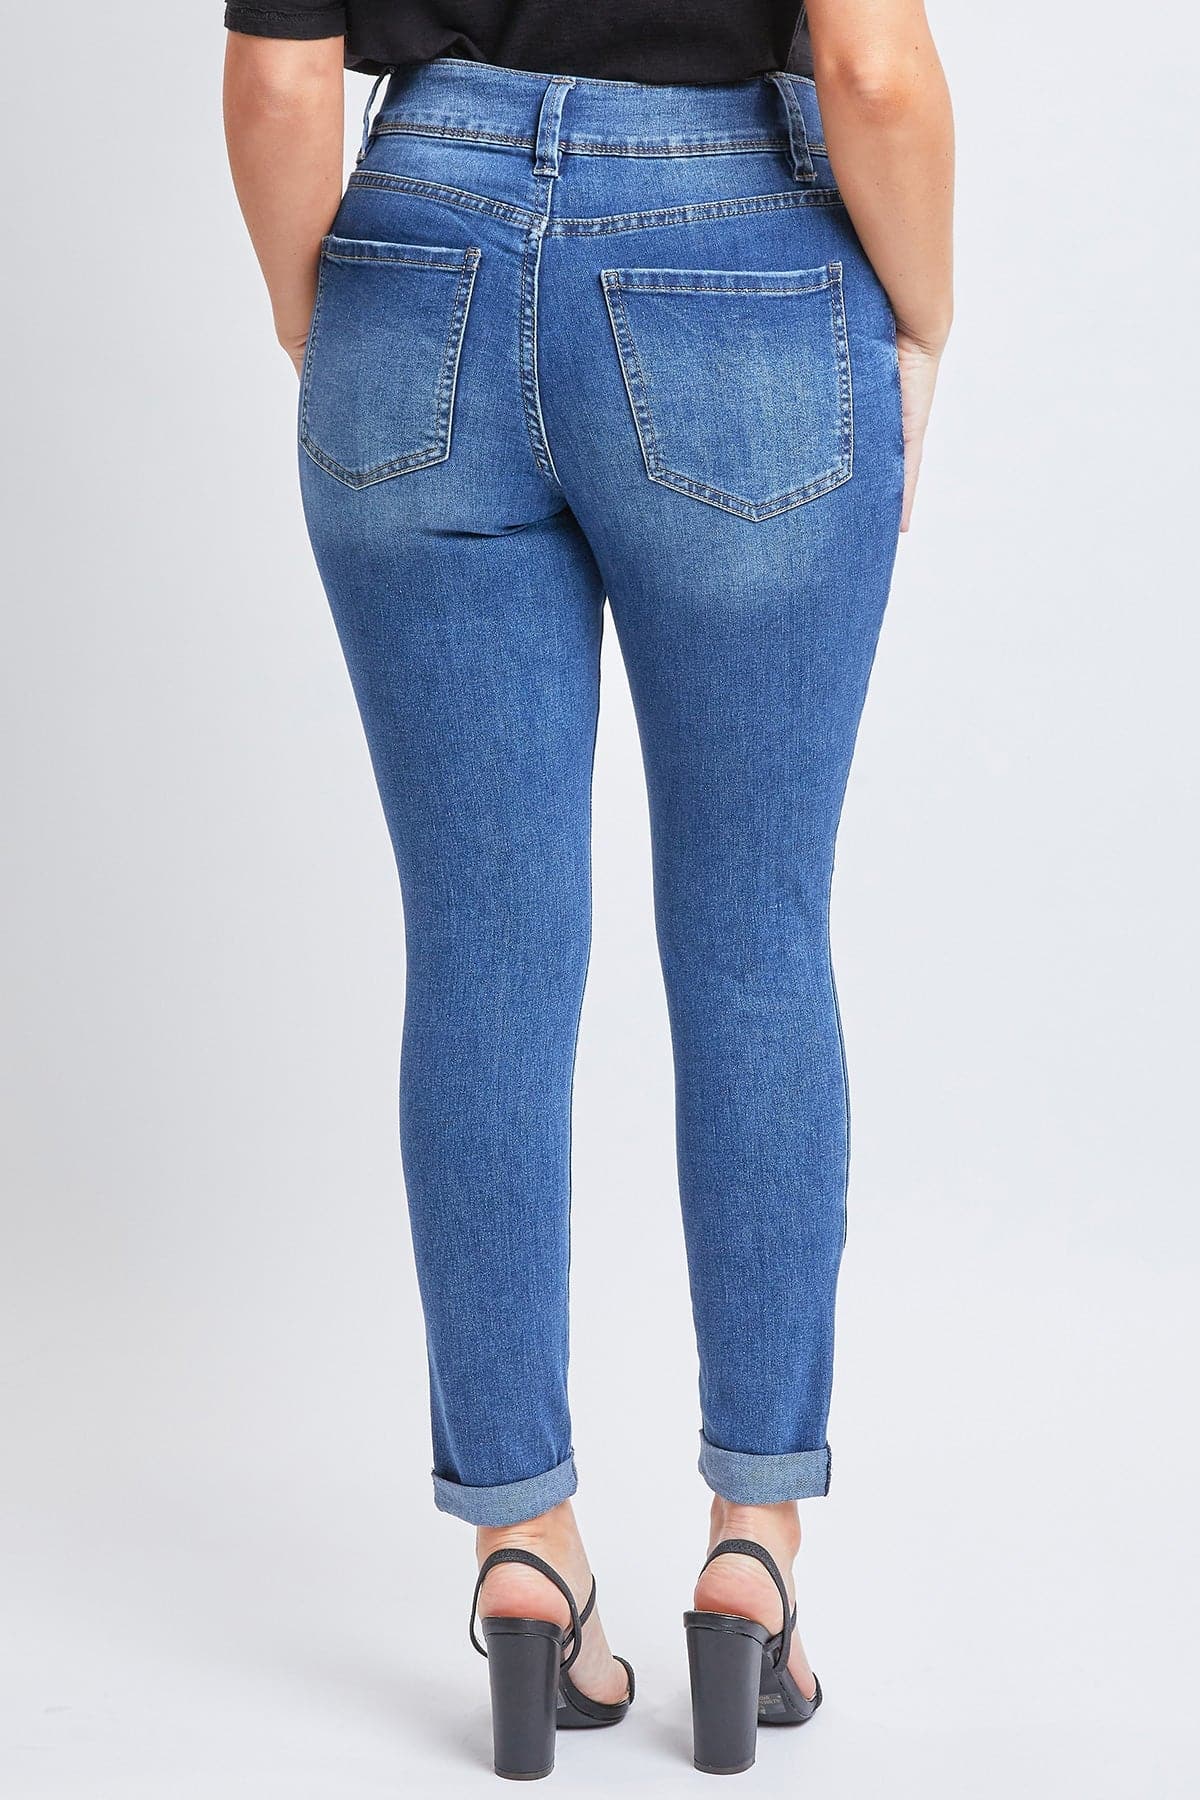 Women's Essential 2-Button Roll Cuff Ankle Jeans